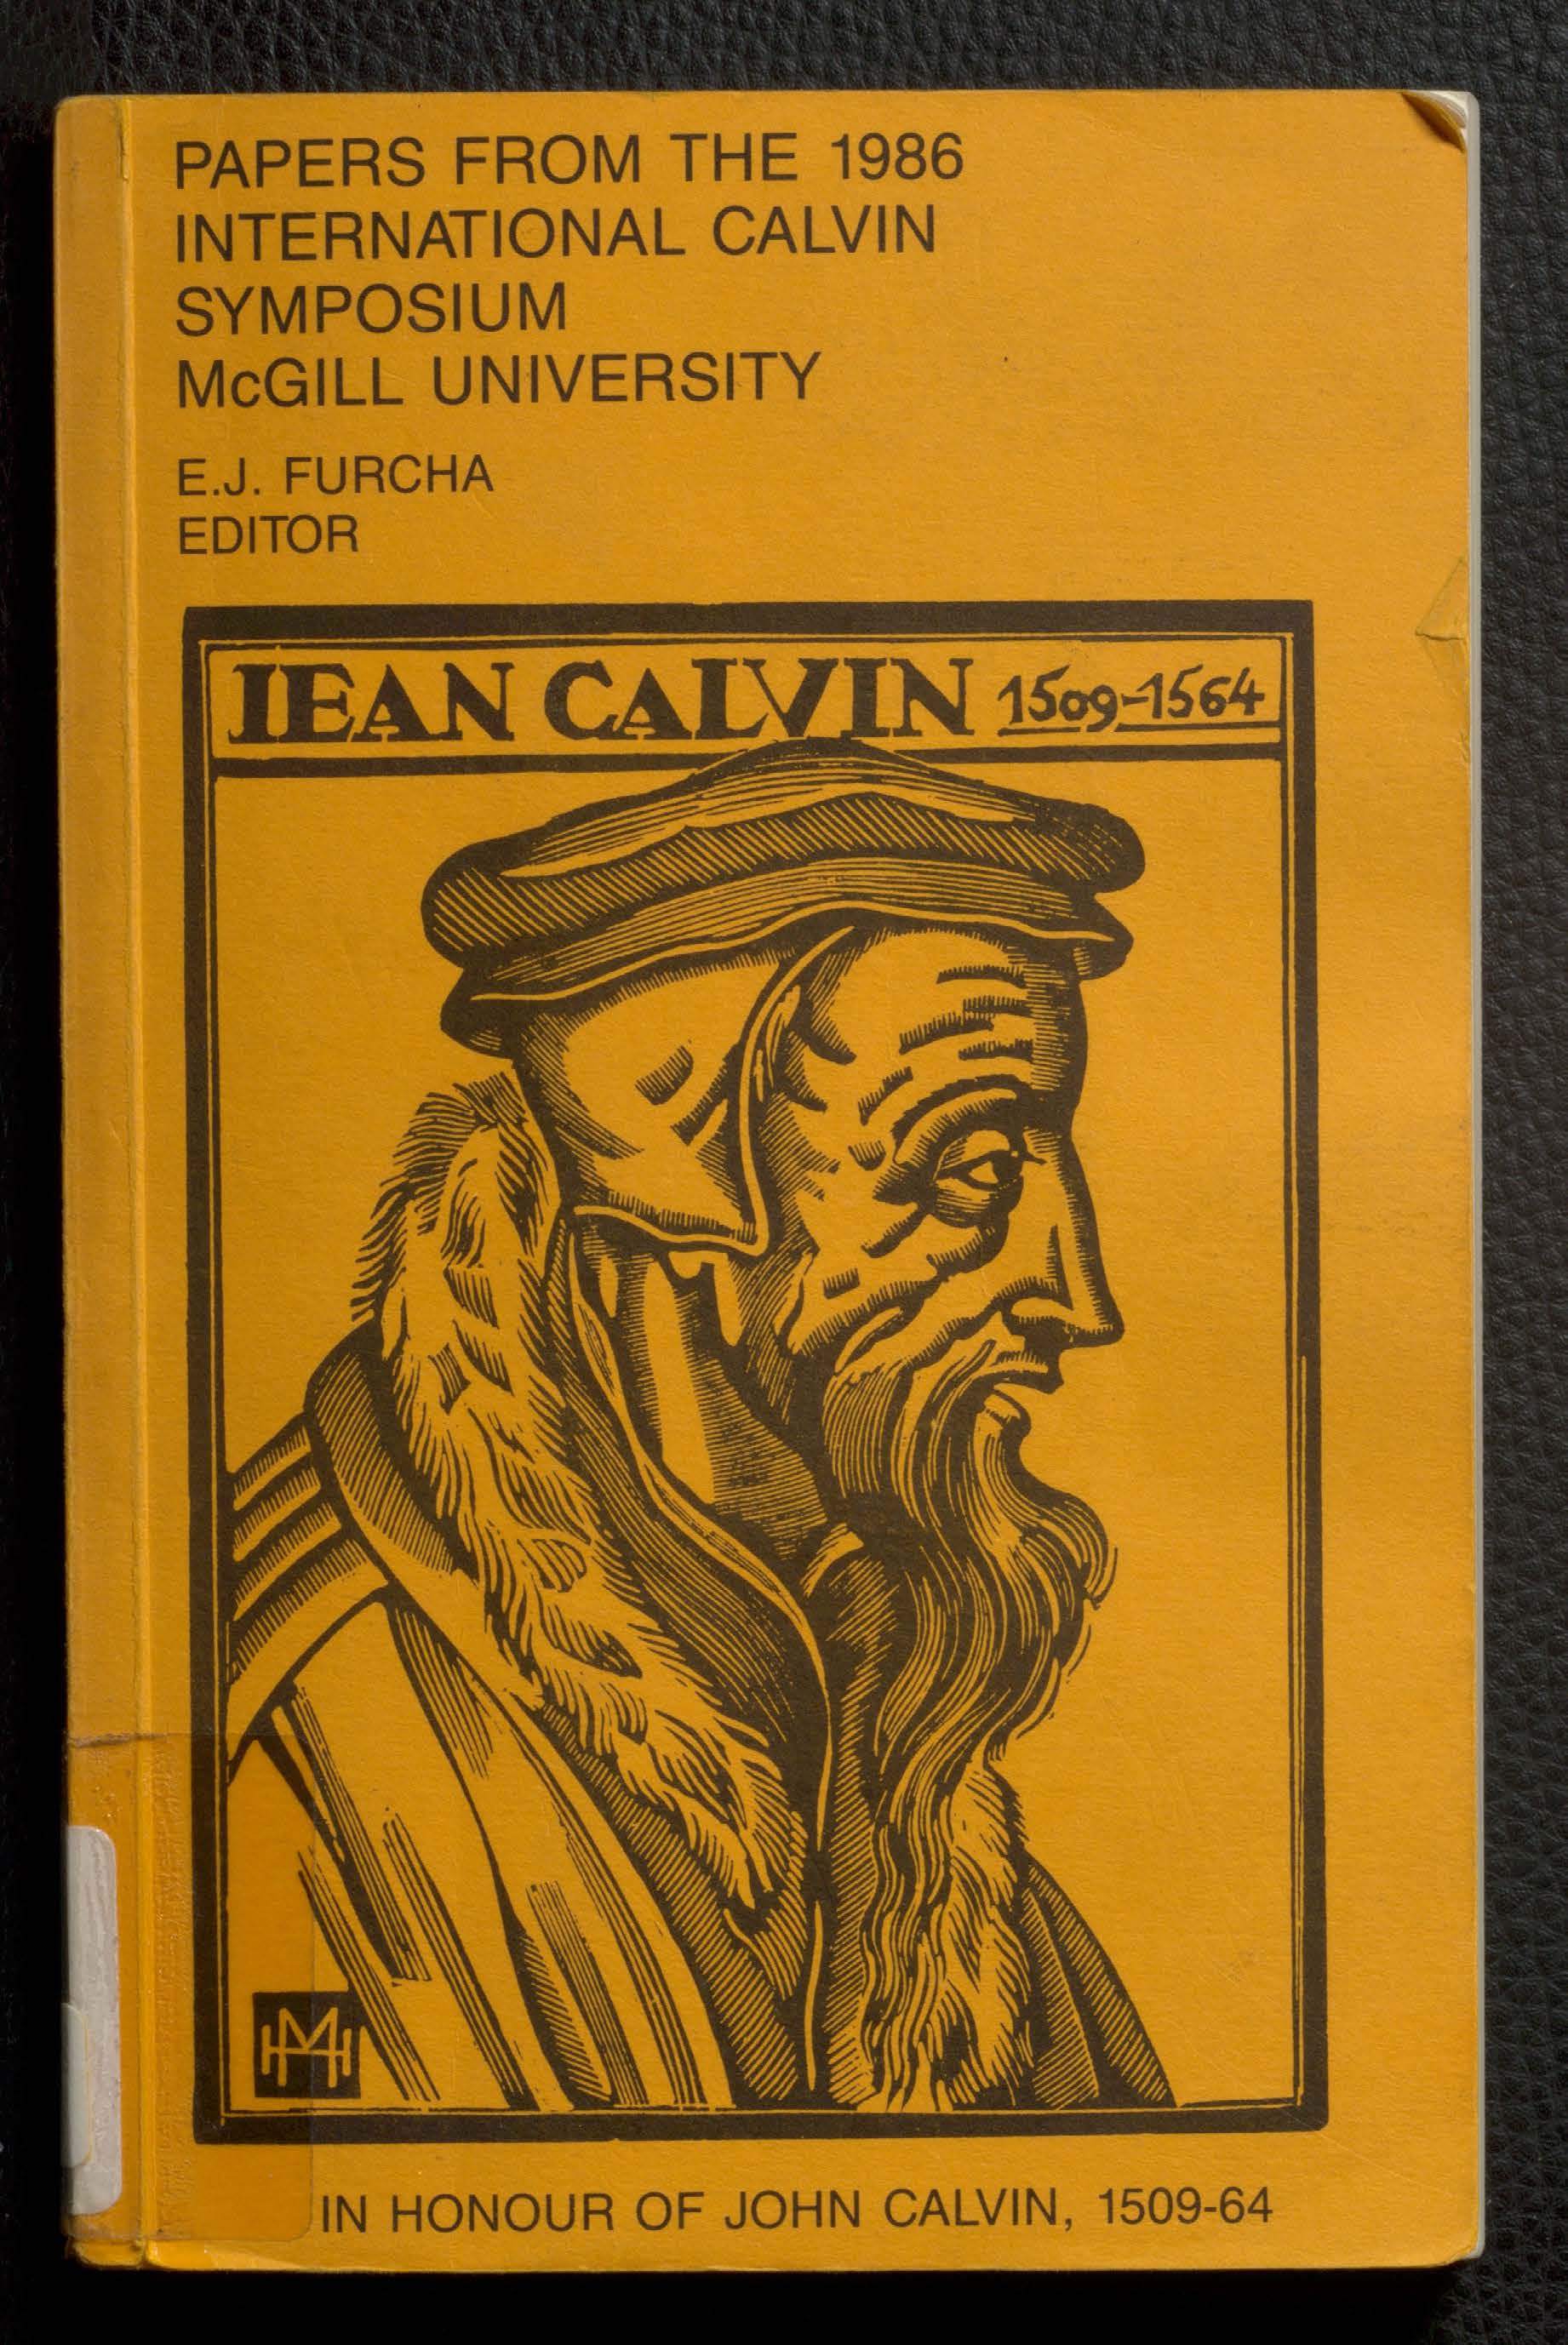 Drawing of John Calvin with orange background